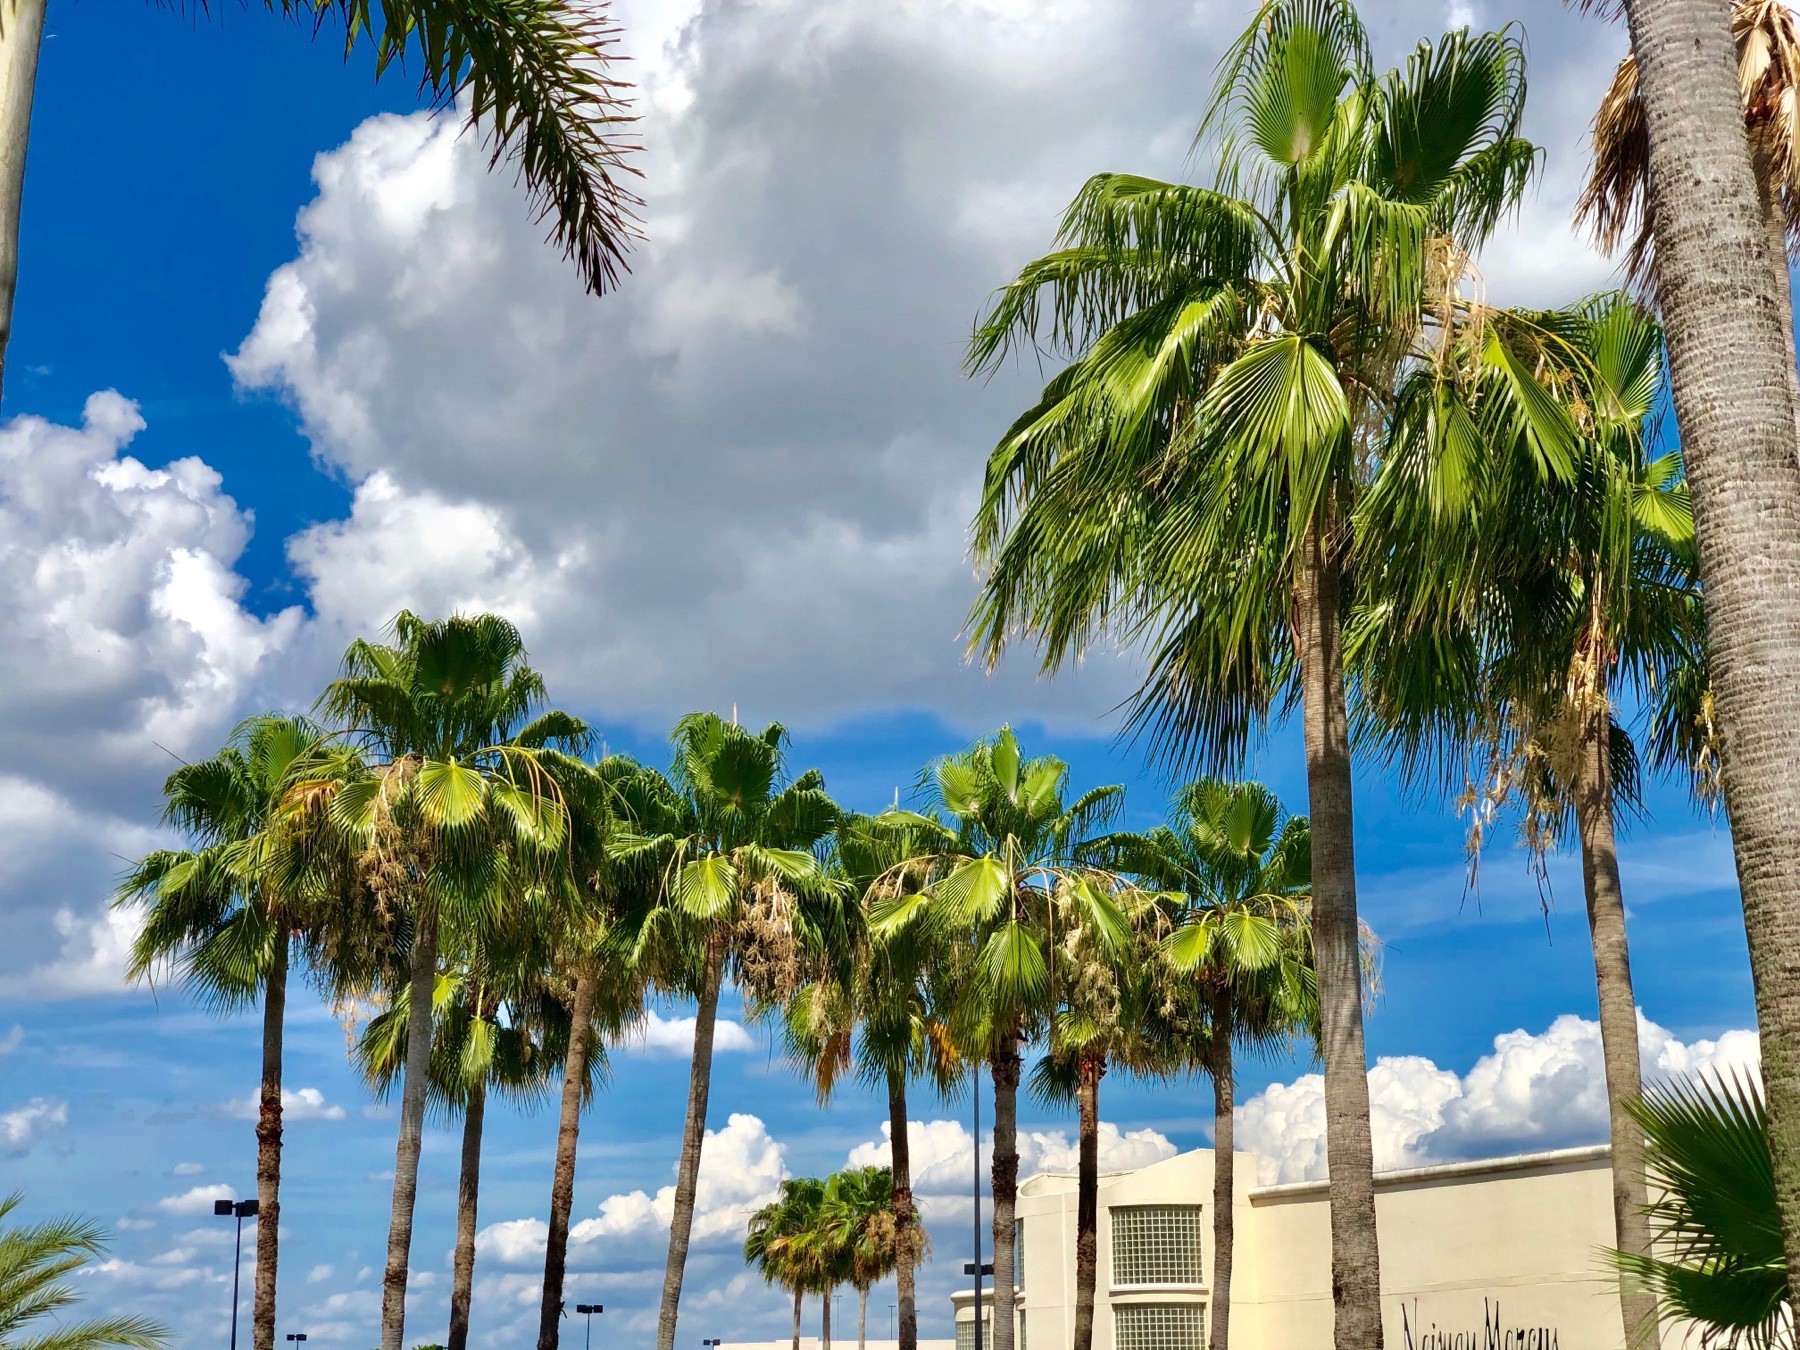 A group of palm trees set against a brilliant blue sky dotted with puffy white clouds. There's a building in the background as well.